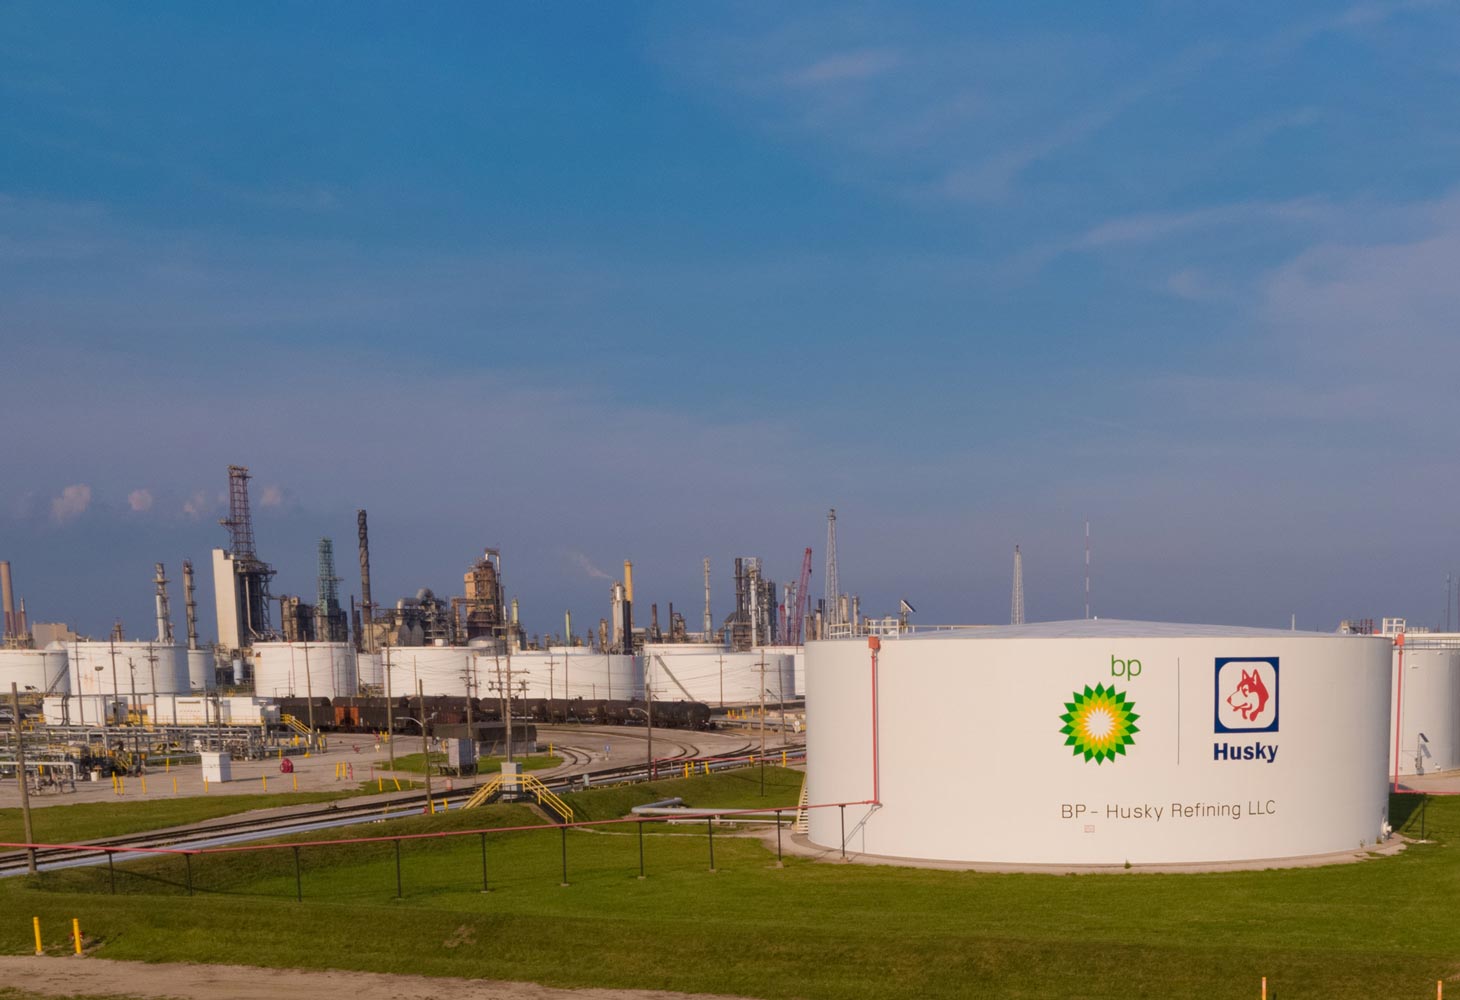 bp to sell stake in Toledo refinery to Canada's Cenovus